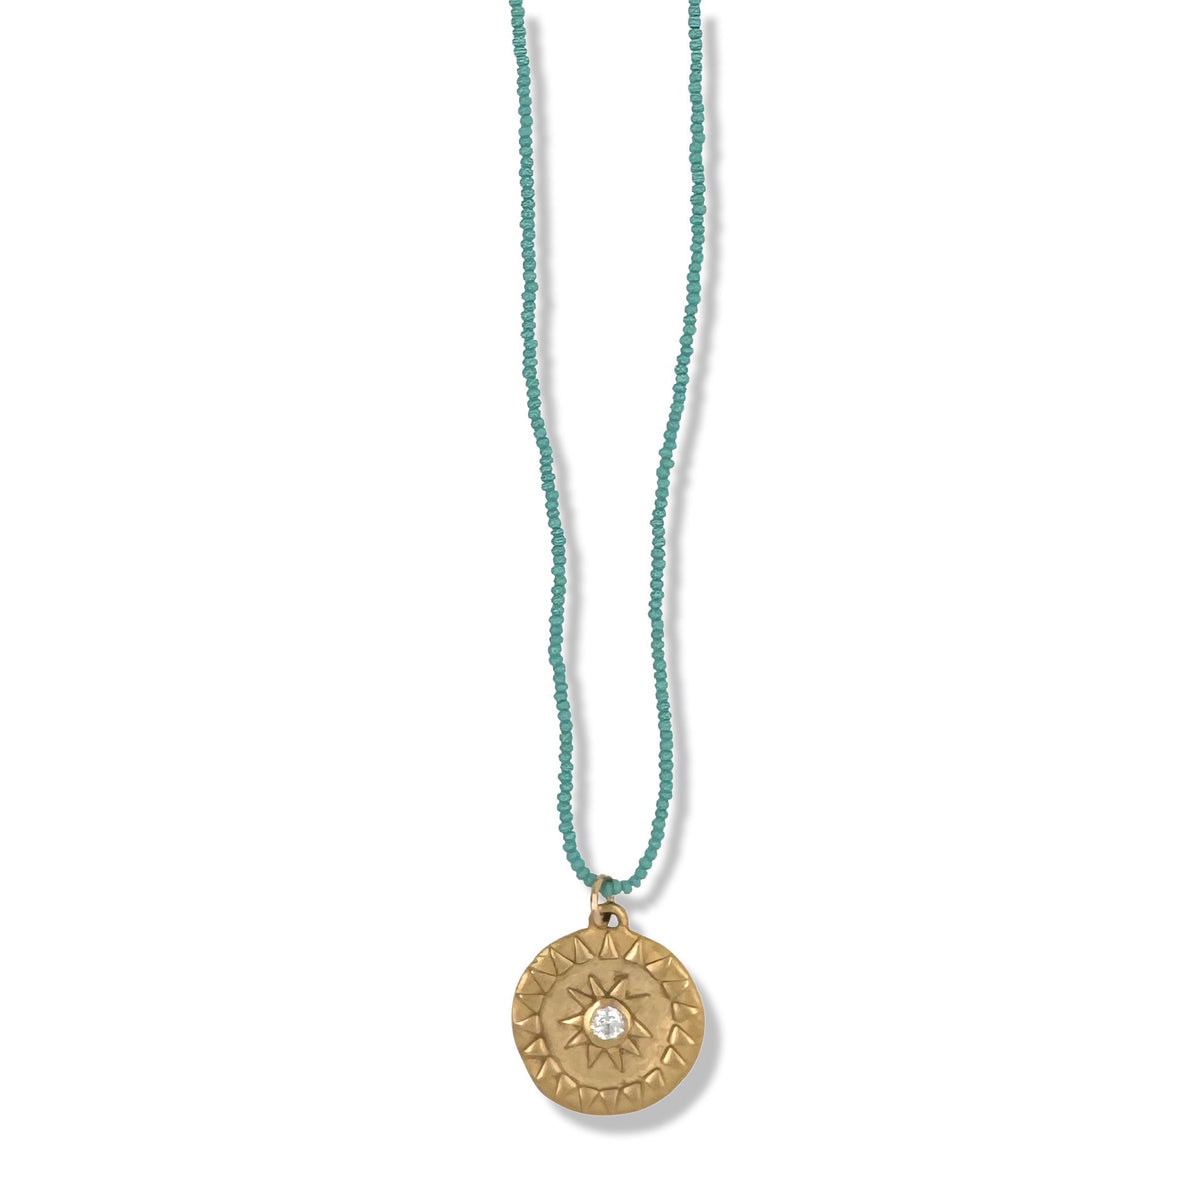 SOL NECKLACE IN GOLD ON TURQUOISE BEADS - SMALL